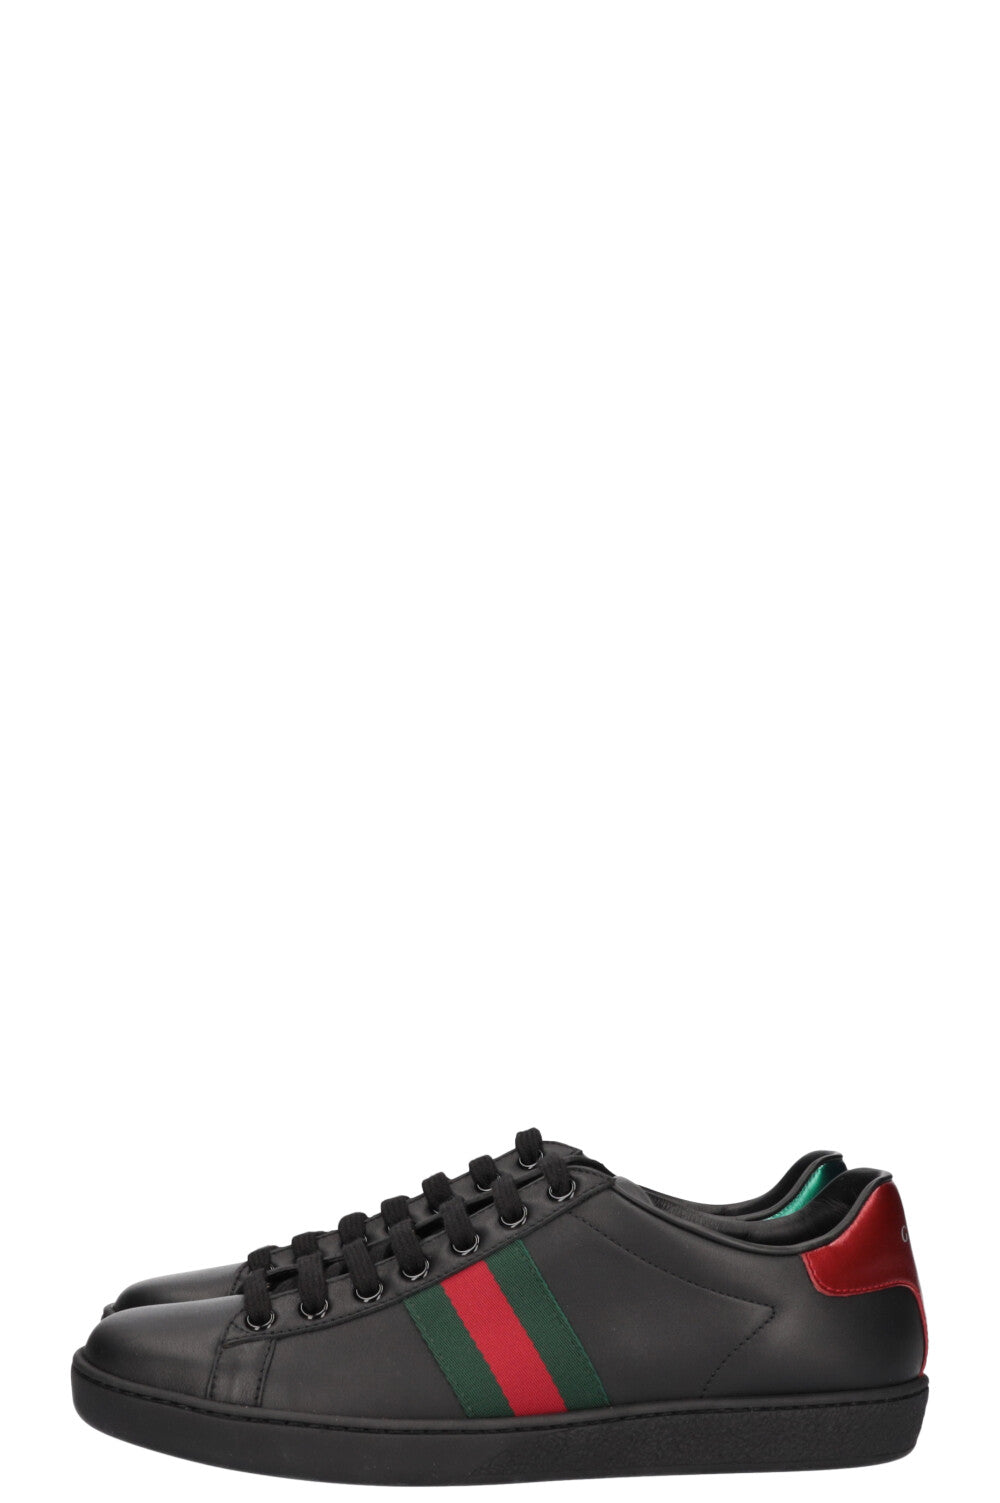 GUCCI  Ace Sneakers Black